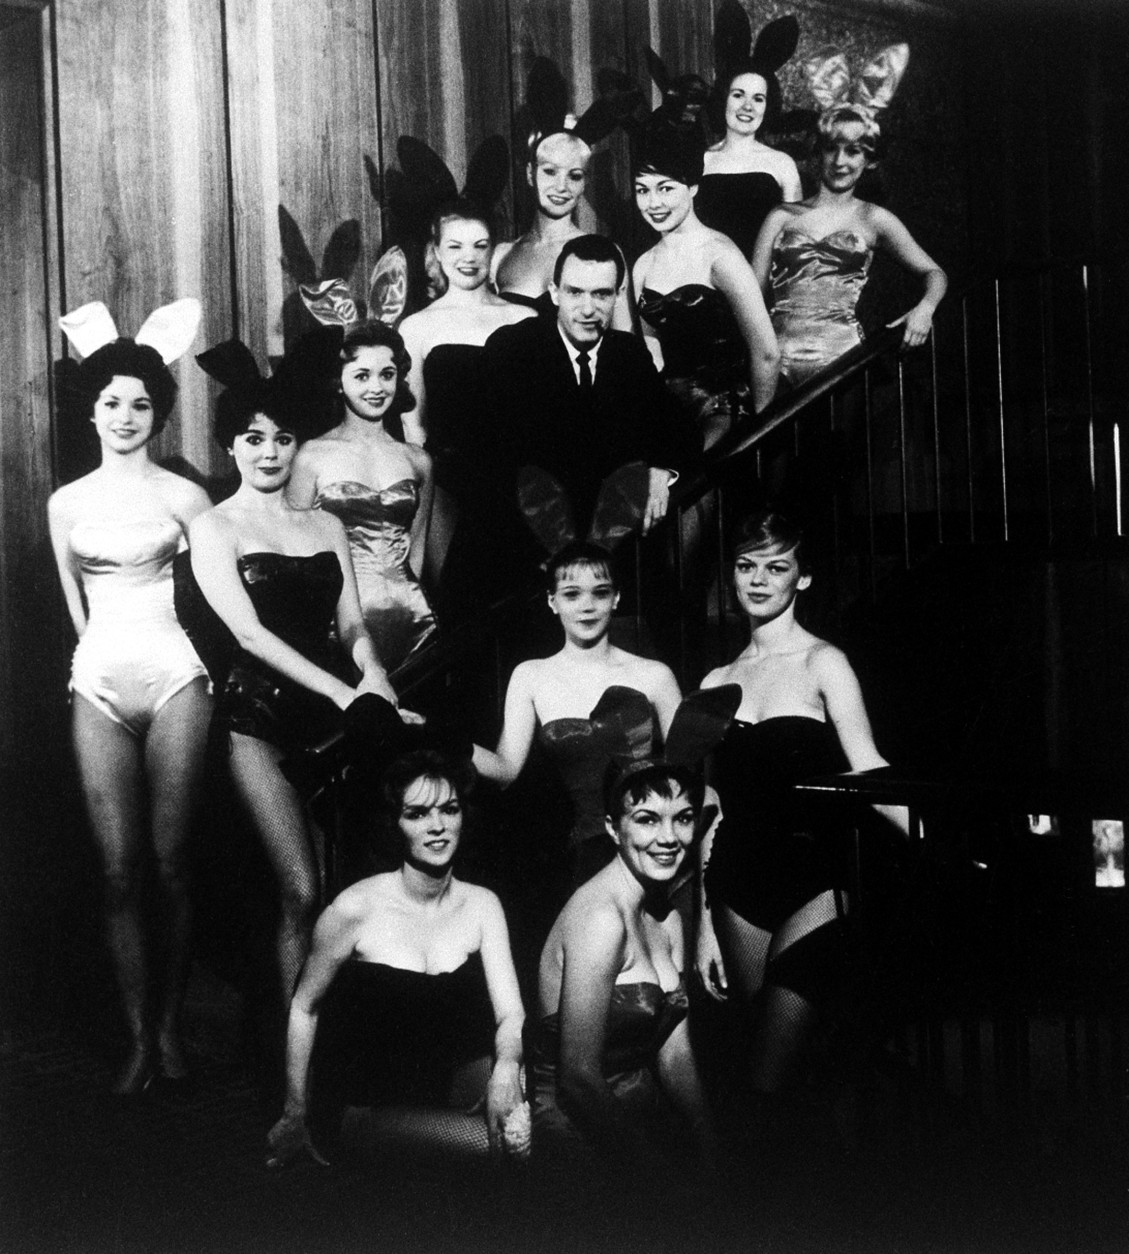 Hugh Hefner, founder and chairman of the Playboy Enterprises, Inc., is pictured amid a group of Bunnies, at the flagship Playboy Club, in Chicago, Ill., circa 1960. (AP Photo)